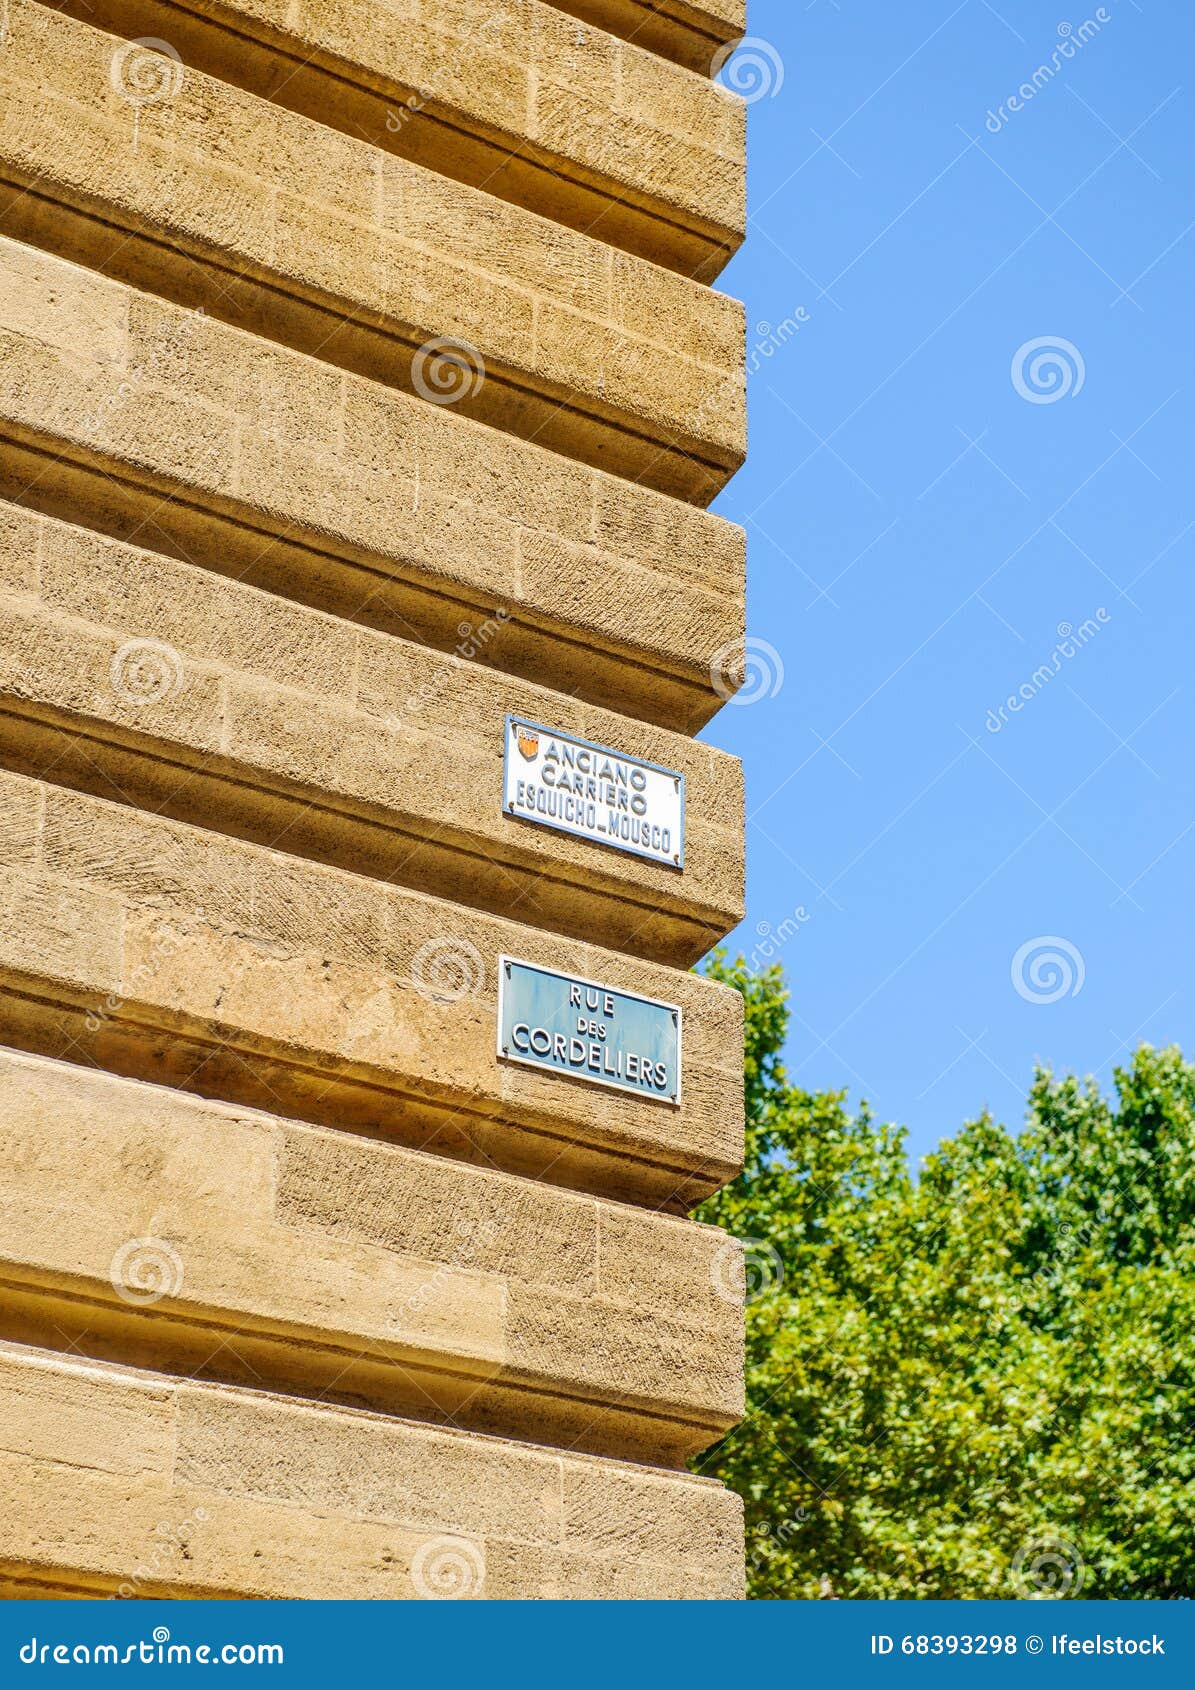 rue des cordeliers - french street name